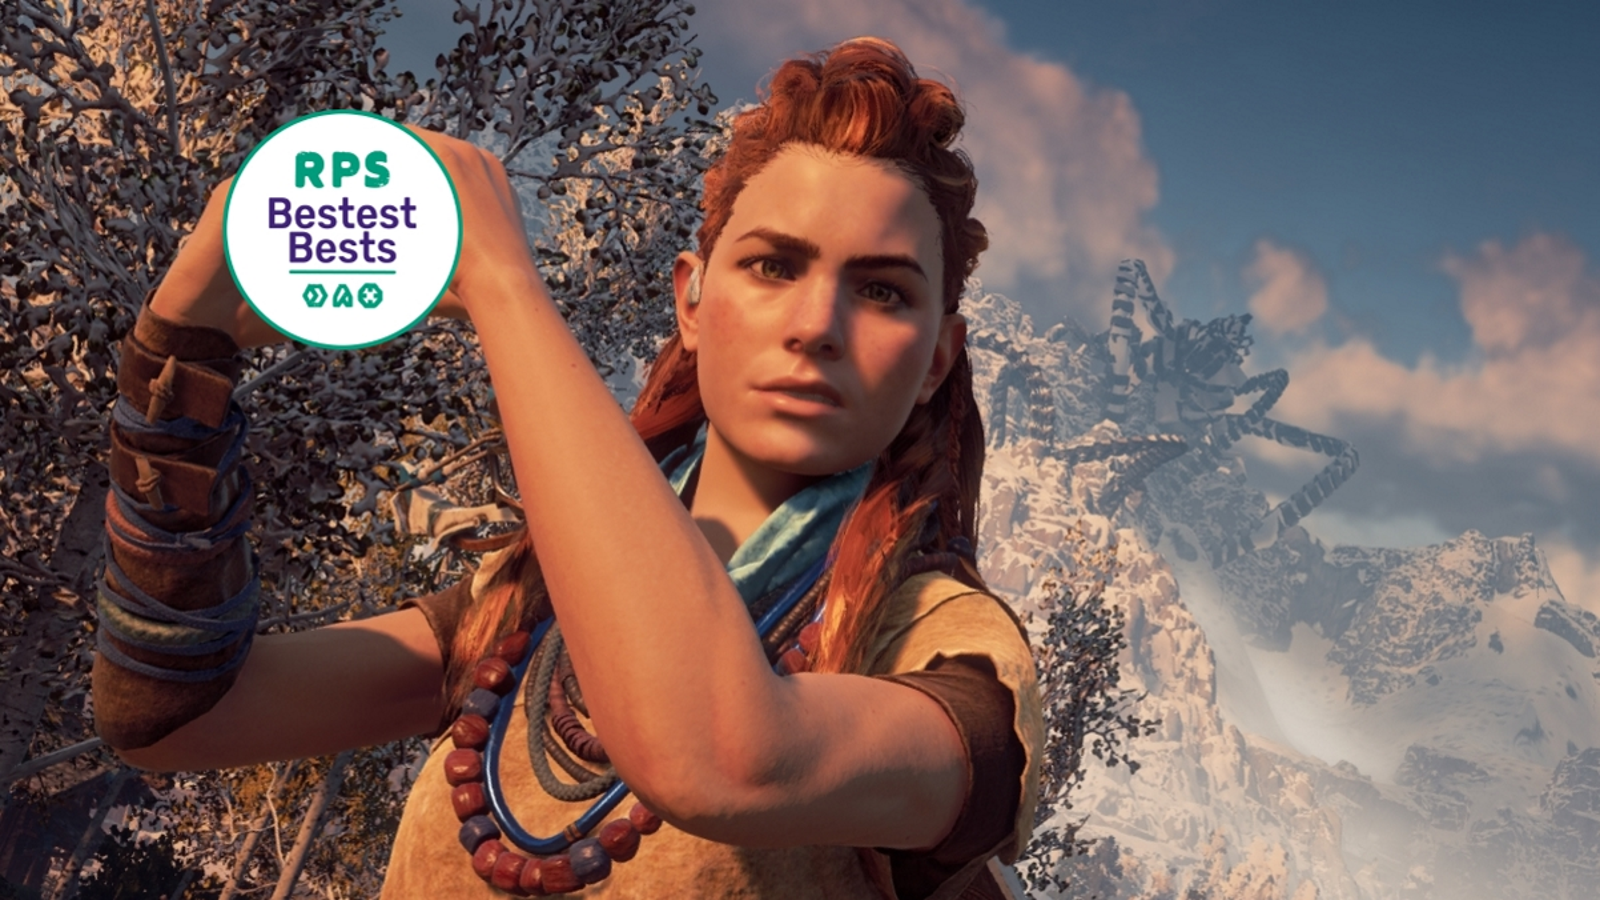 Horizon Zero Dawn Reviewing well, average 88% on metacritic. Release date  2.28.17 on PS4 only.